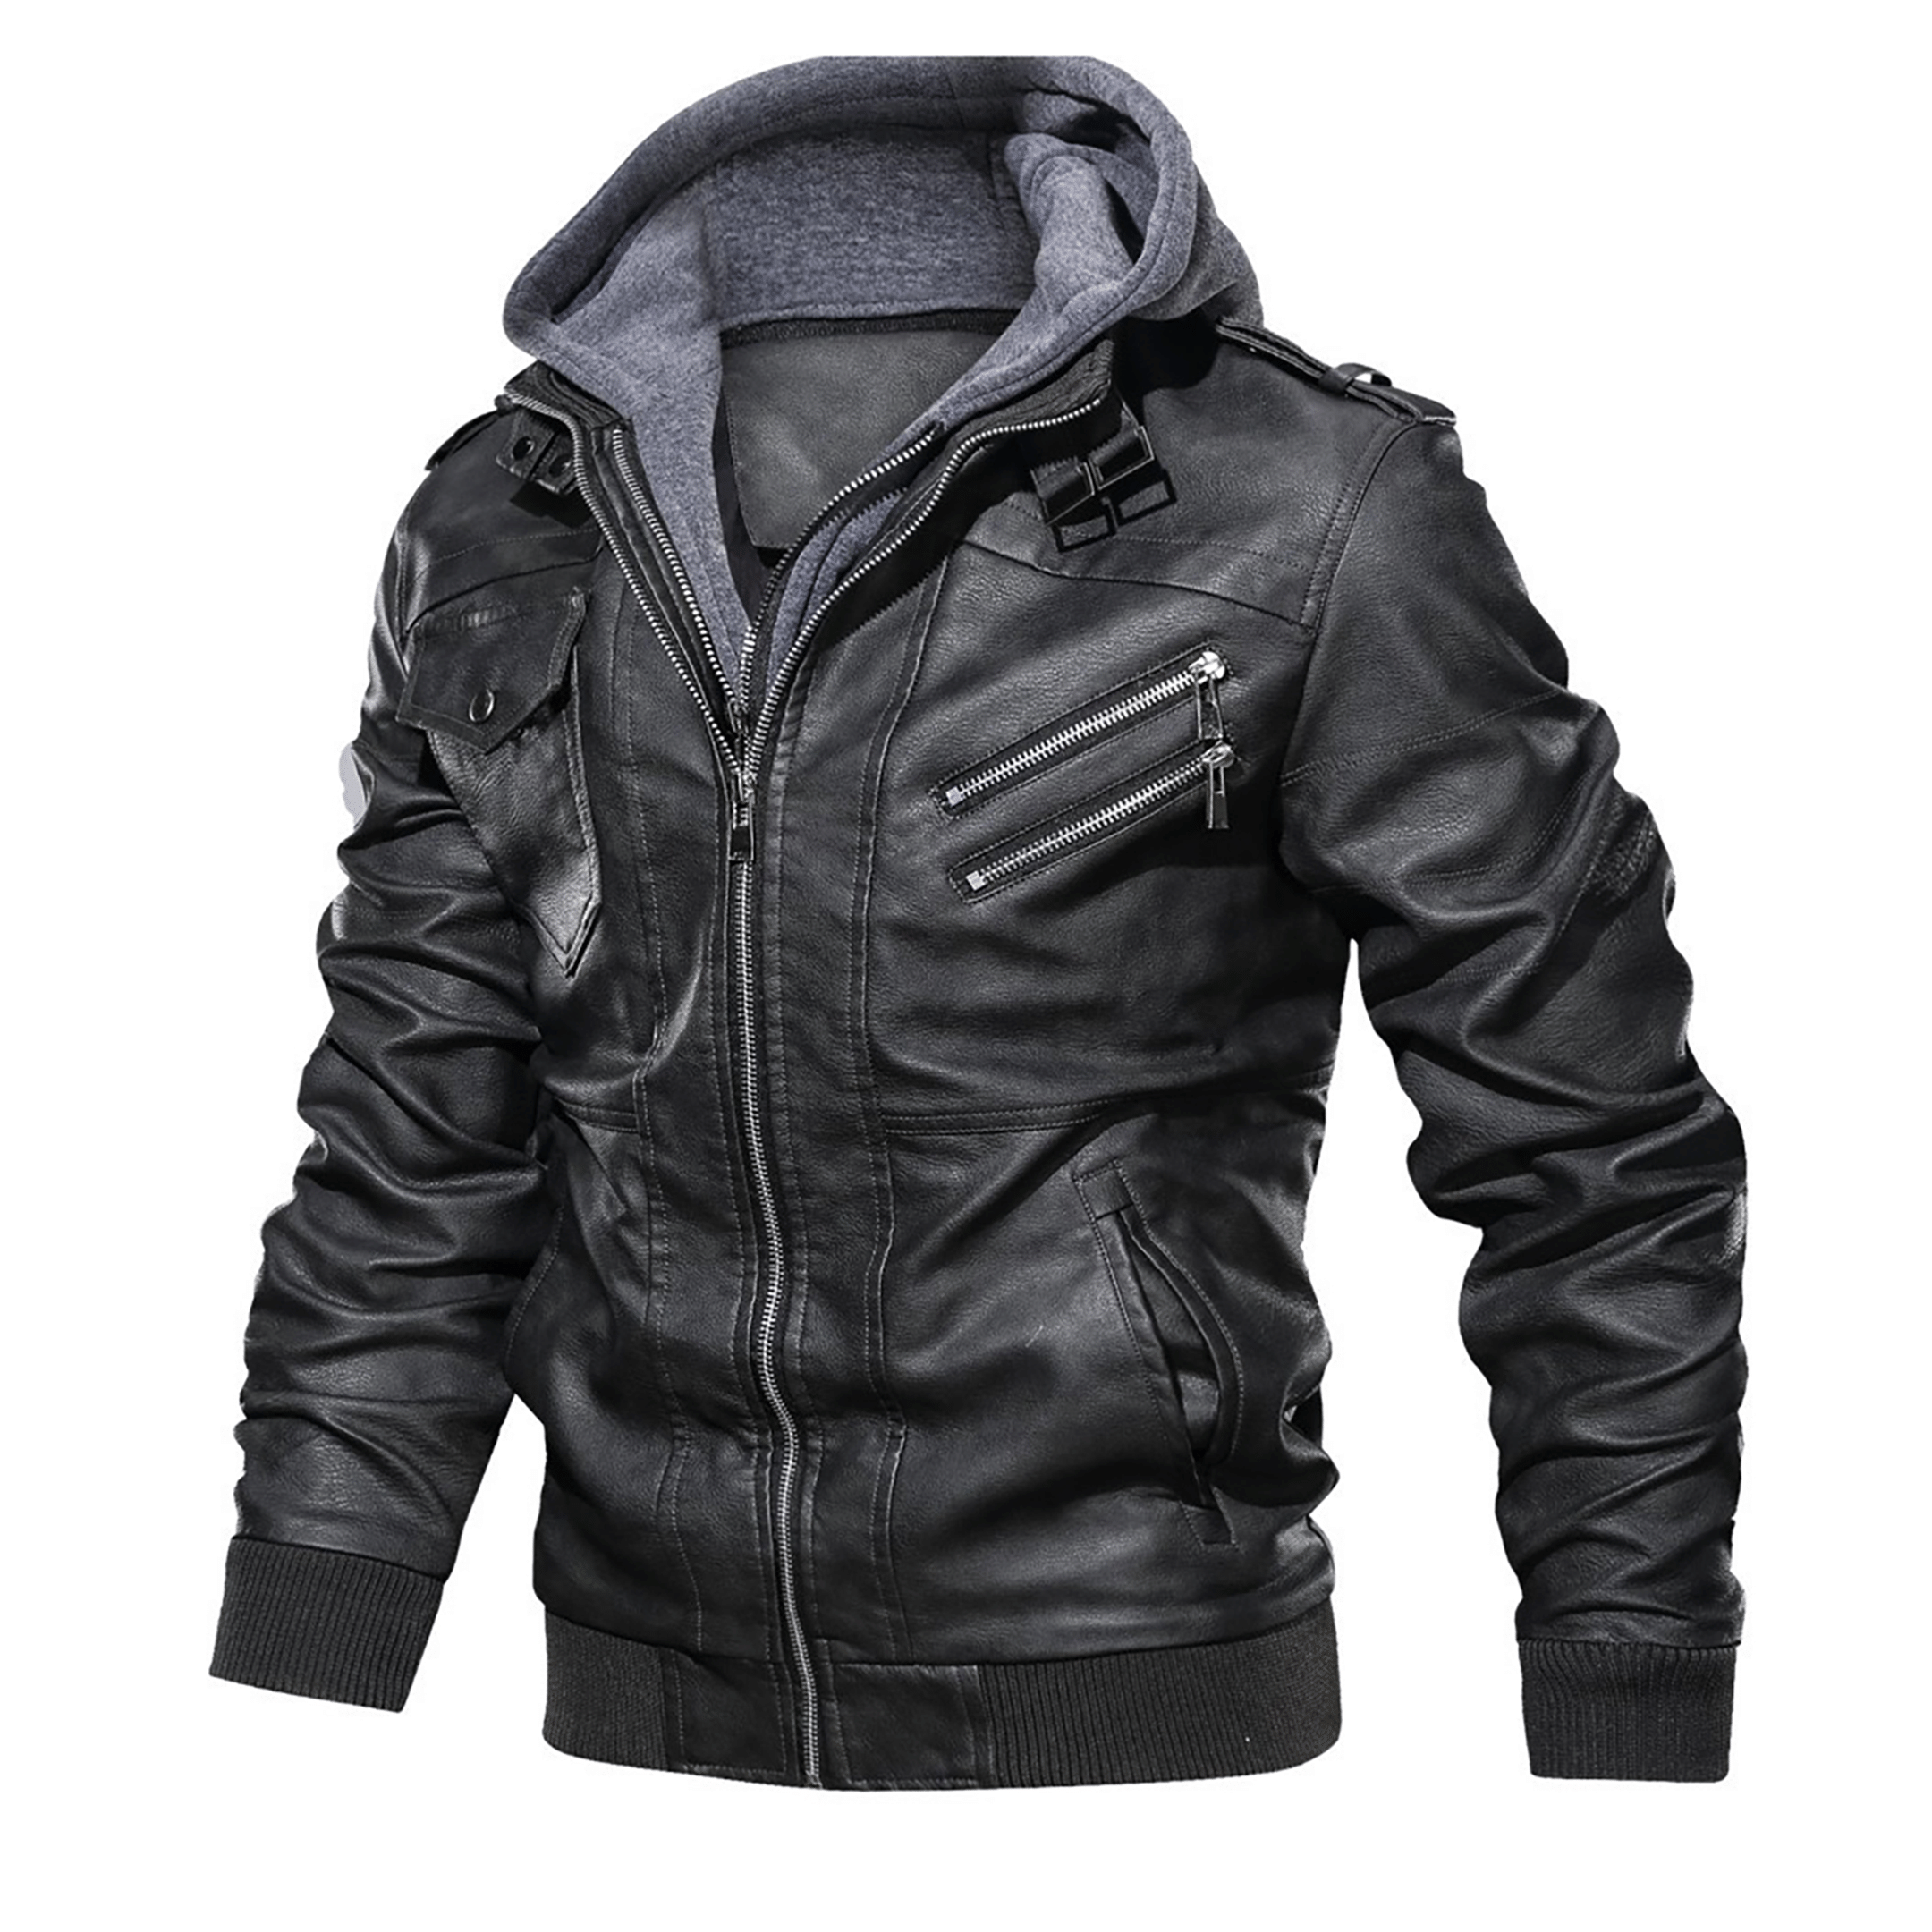 Top leather jackets and latest products 209